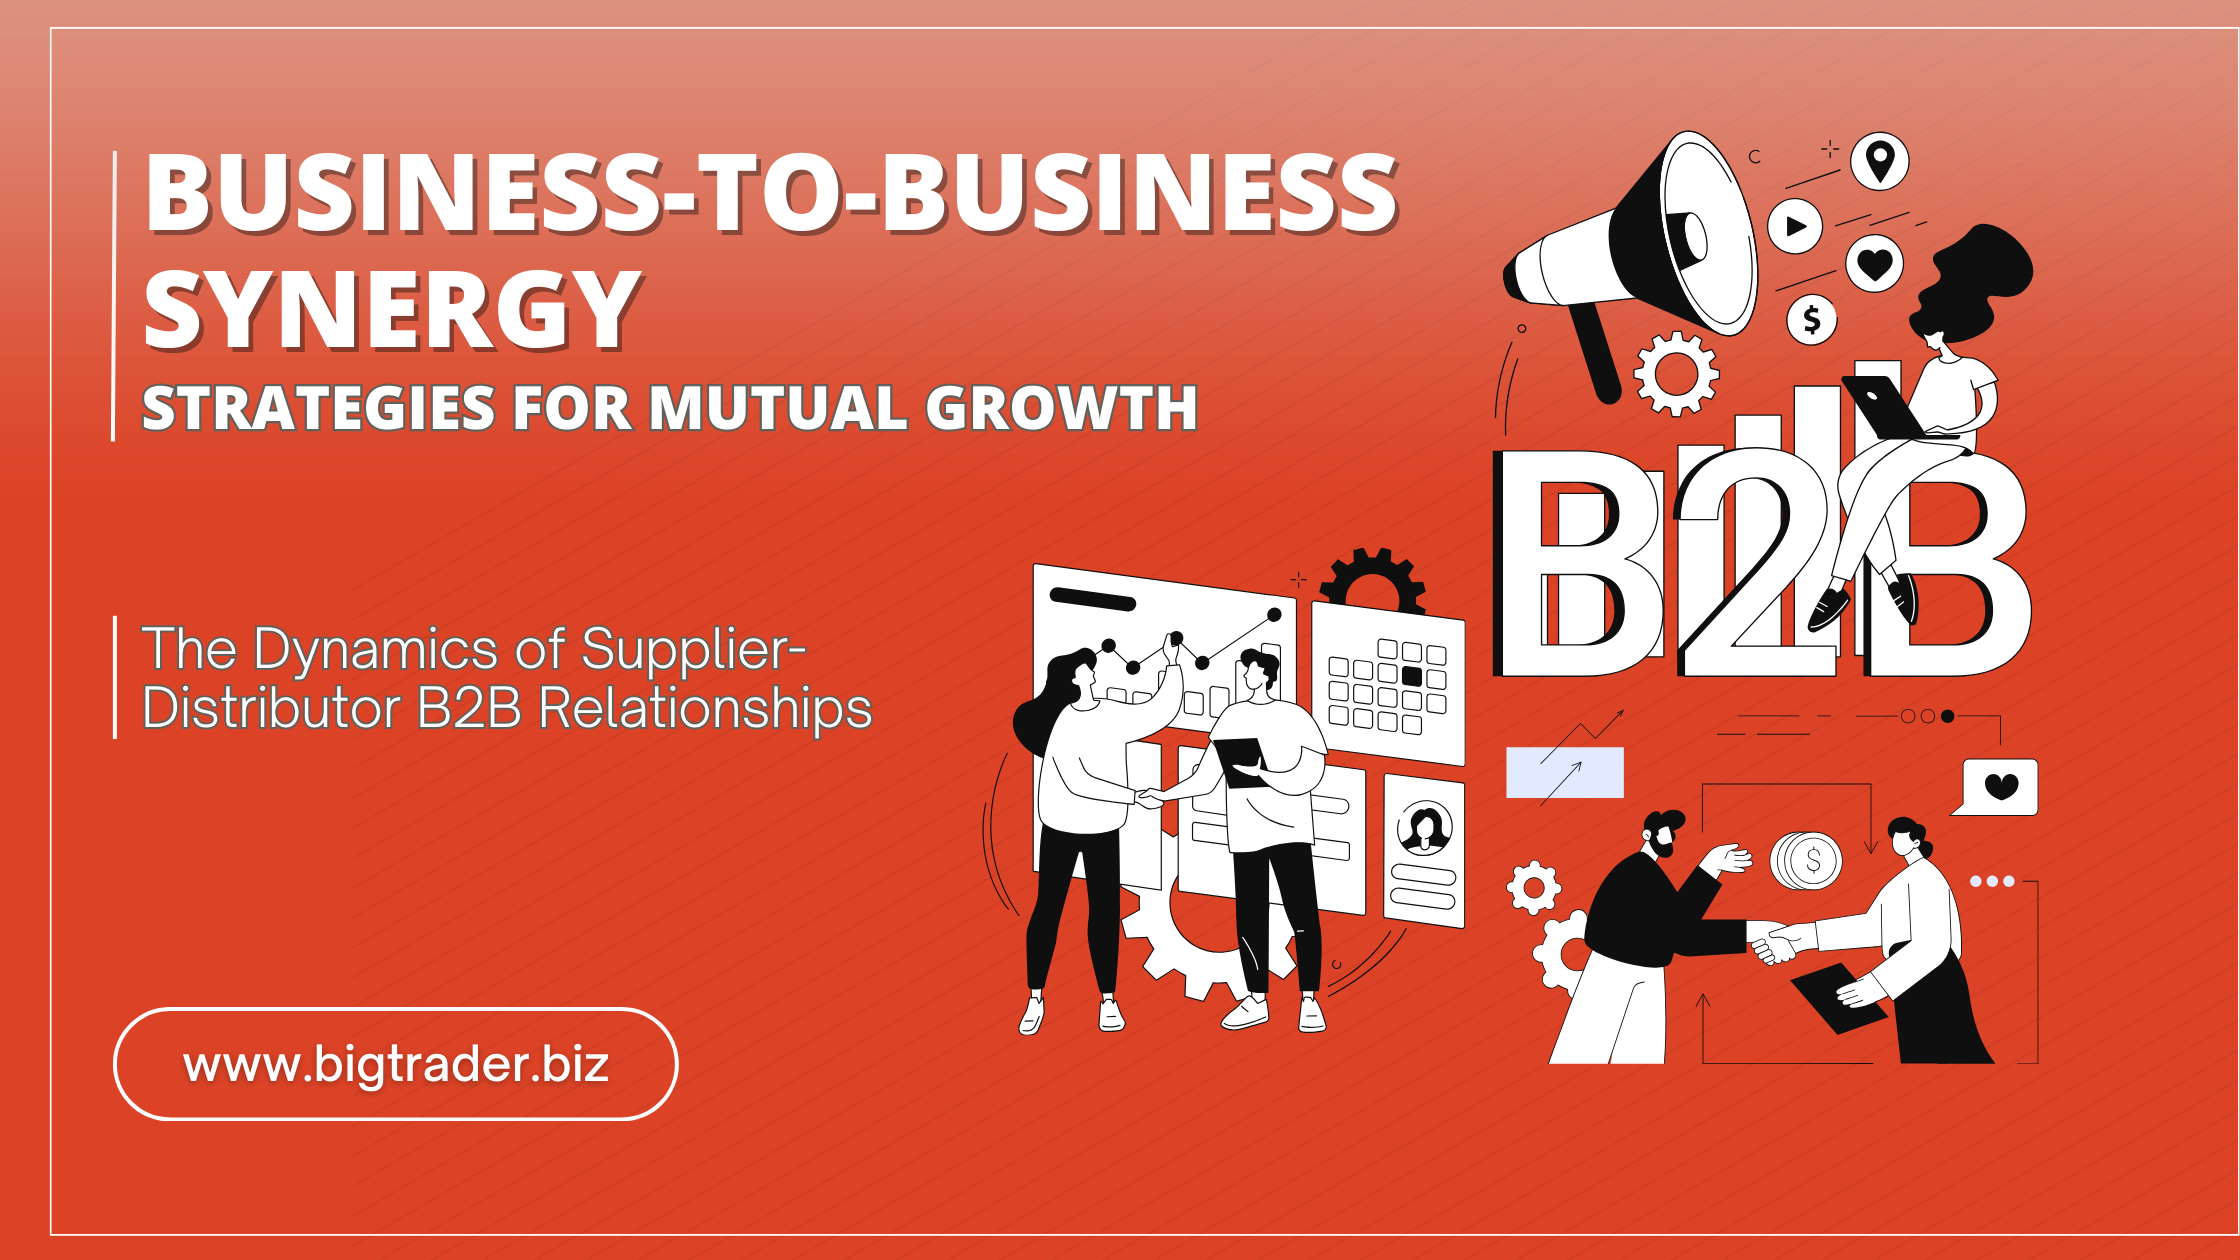 Business-to-Business Synergy Strategies for Mutual Growth